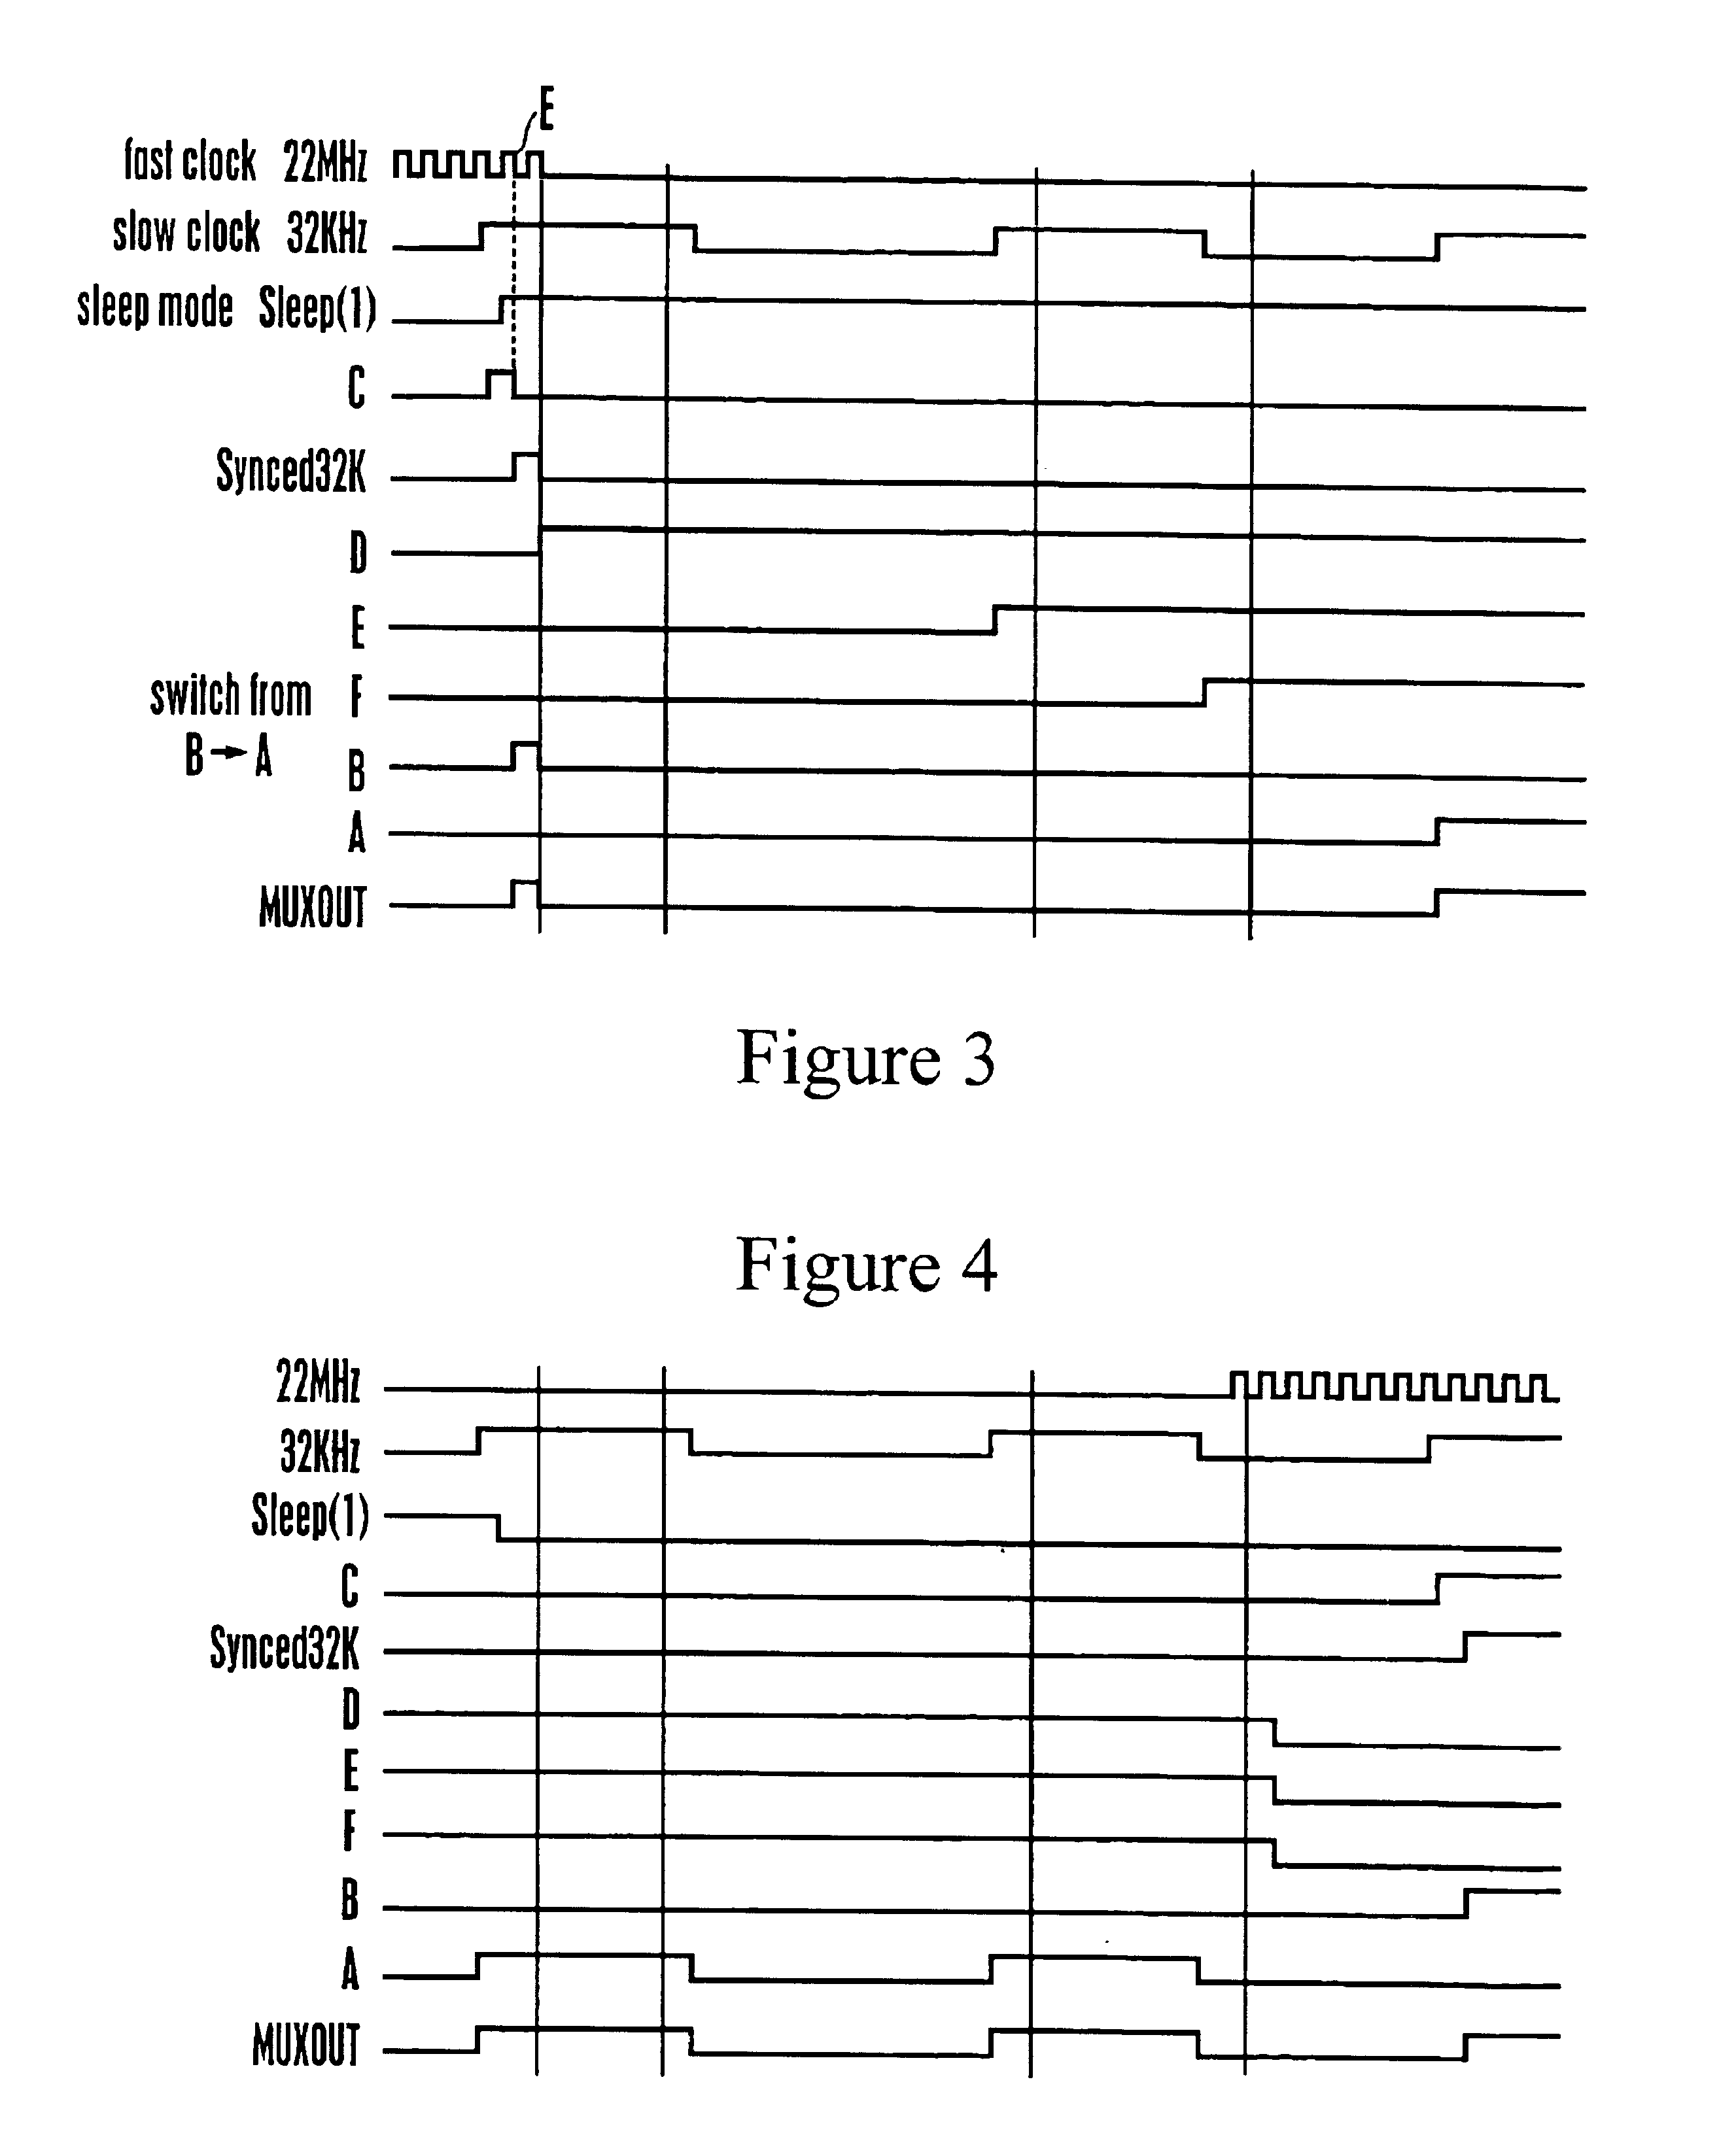 Method and apparatus for quick clock swapping using much slower asynchronous clock for power savings